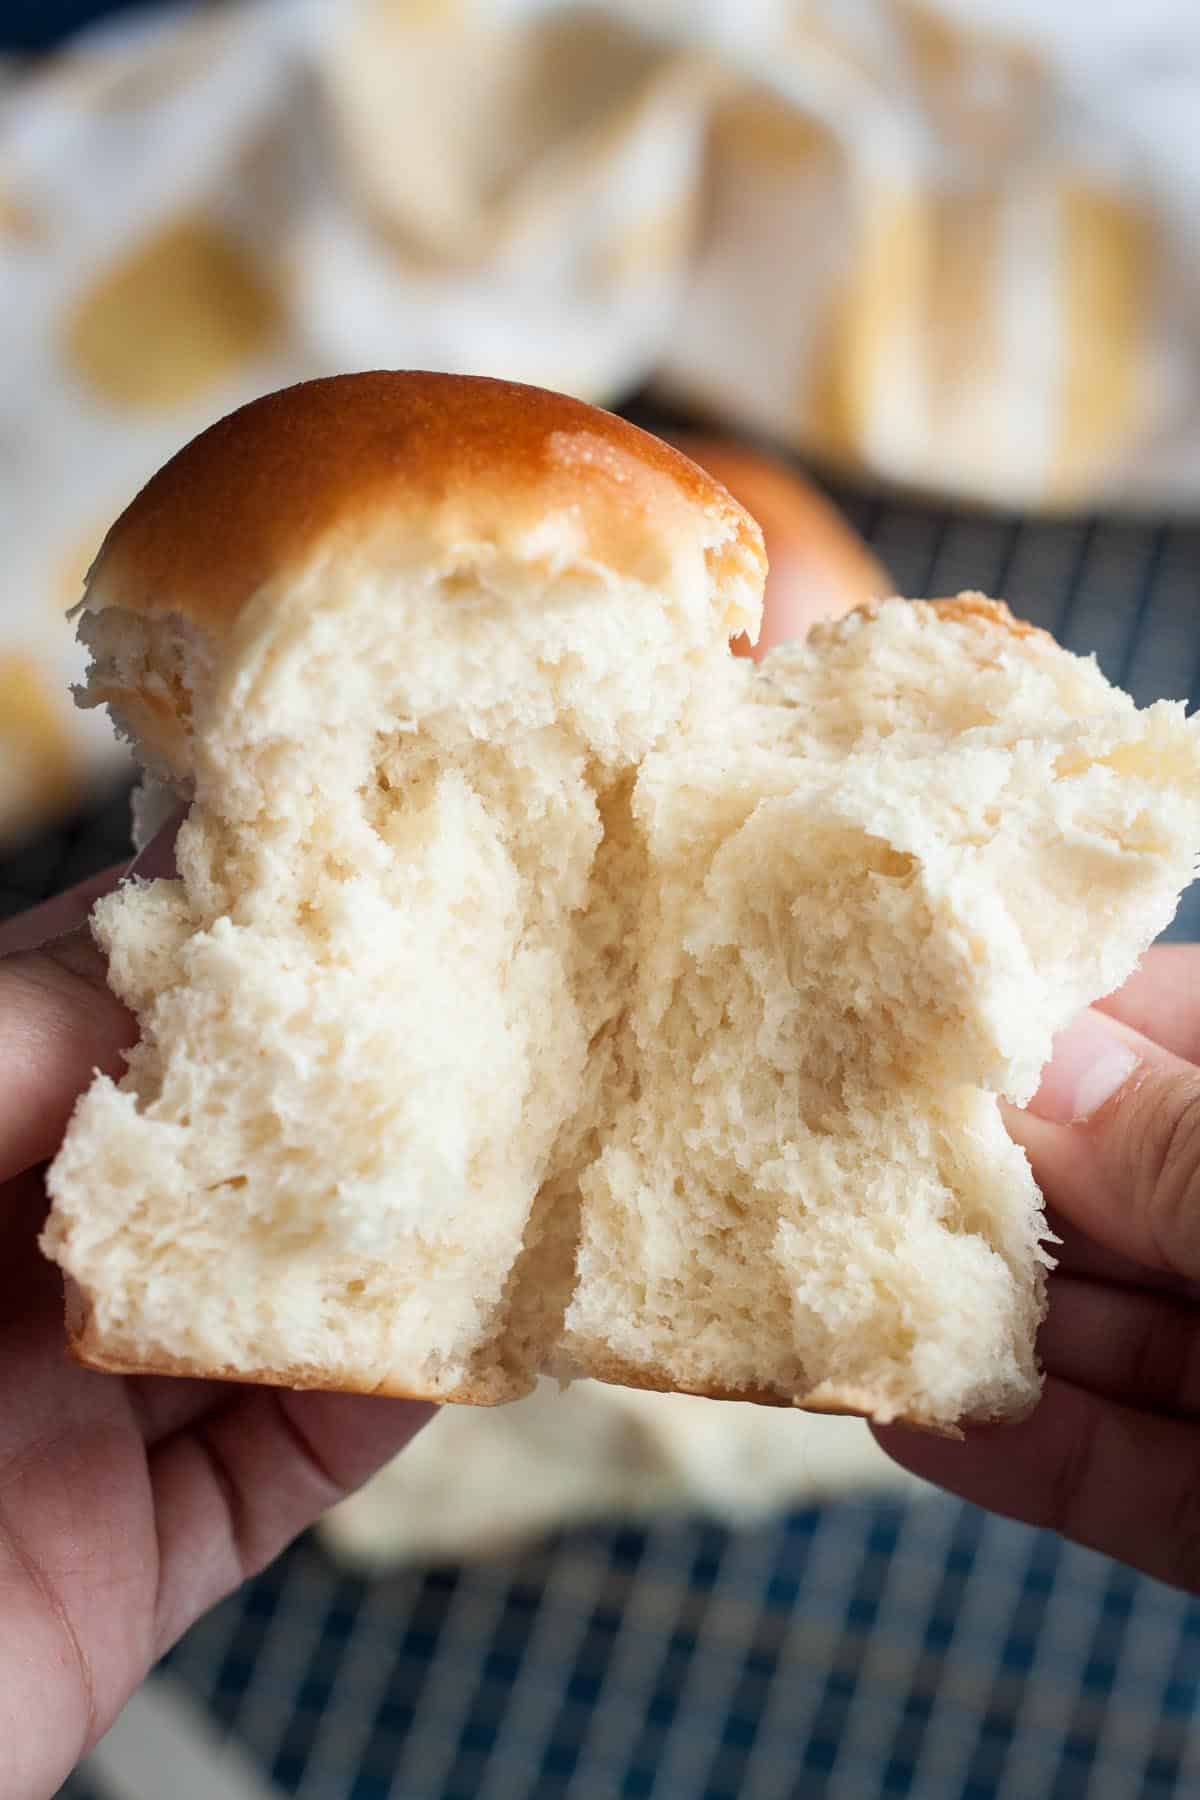 A piece of milk bread being pulled apart.